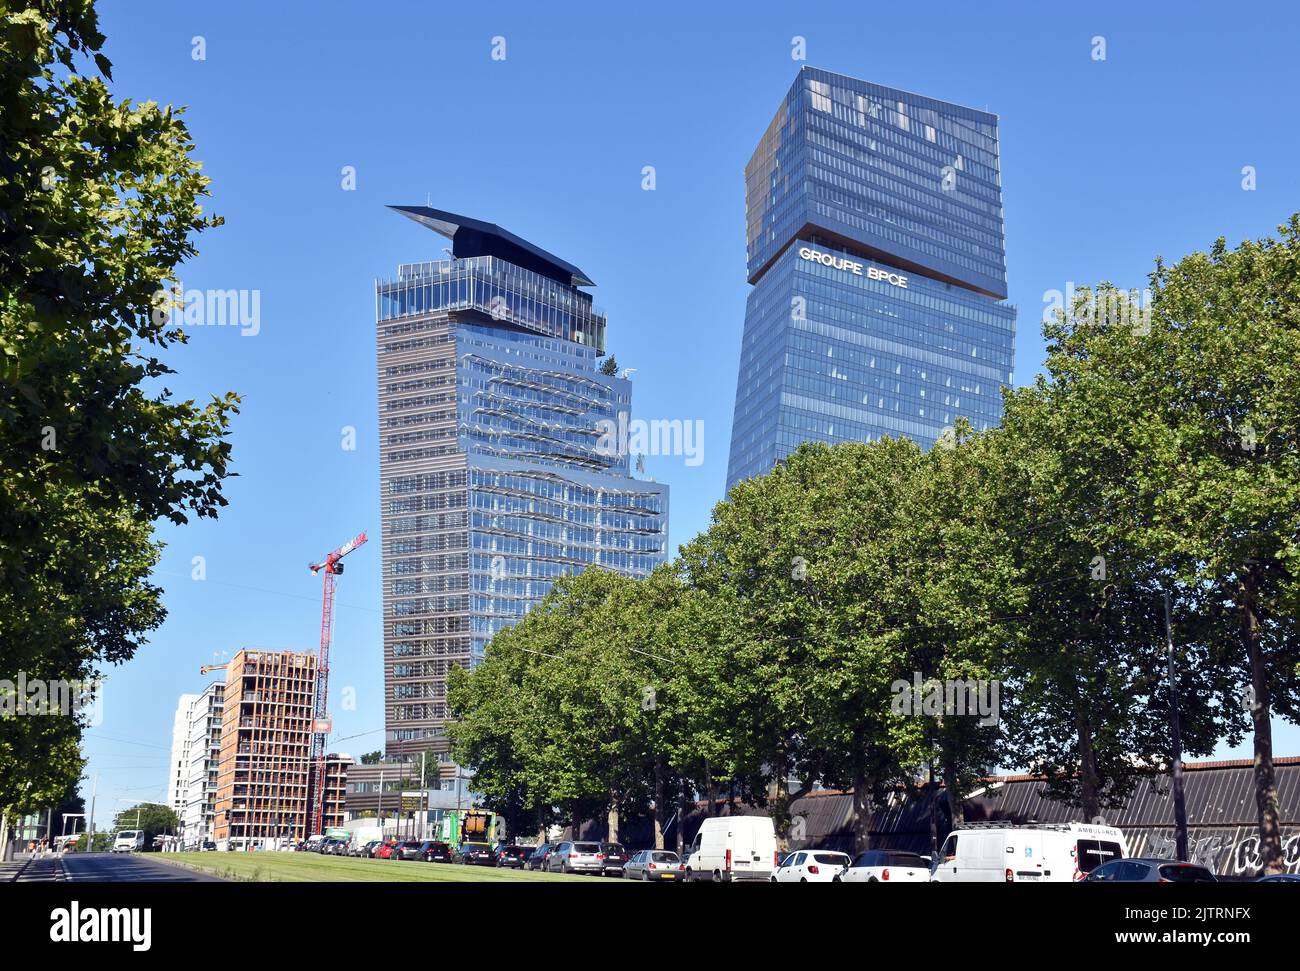 The Tours Duo, twin towers, Paris, a pair of dramatic, leaning skyscrapers, of offices, hotel and shopping, architects Atelier Jean Nouvel, Stock Photo